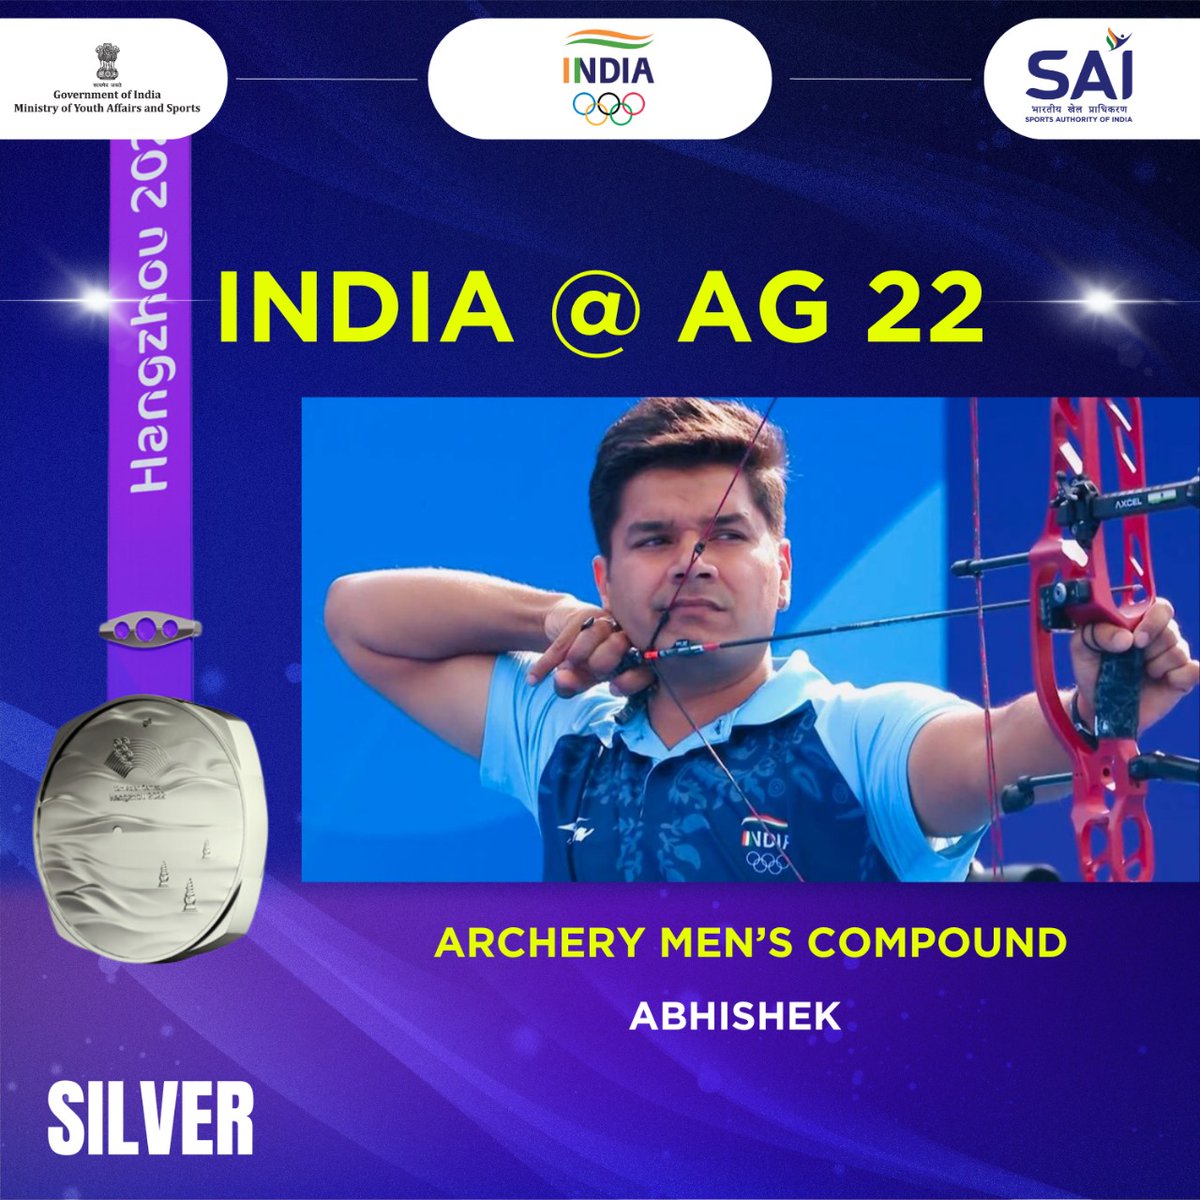 GOLD and SILVER at #AsianGames2022! Pravin Ojas Deotale & @archer_abhishek's performance boosts India's medal tally to 8th and 9th, securing 6th Gold in Compound Archery! A record-breaking 9 medals, our best since 1975 Asian Games. Congratulation athletes!